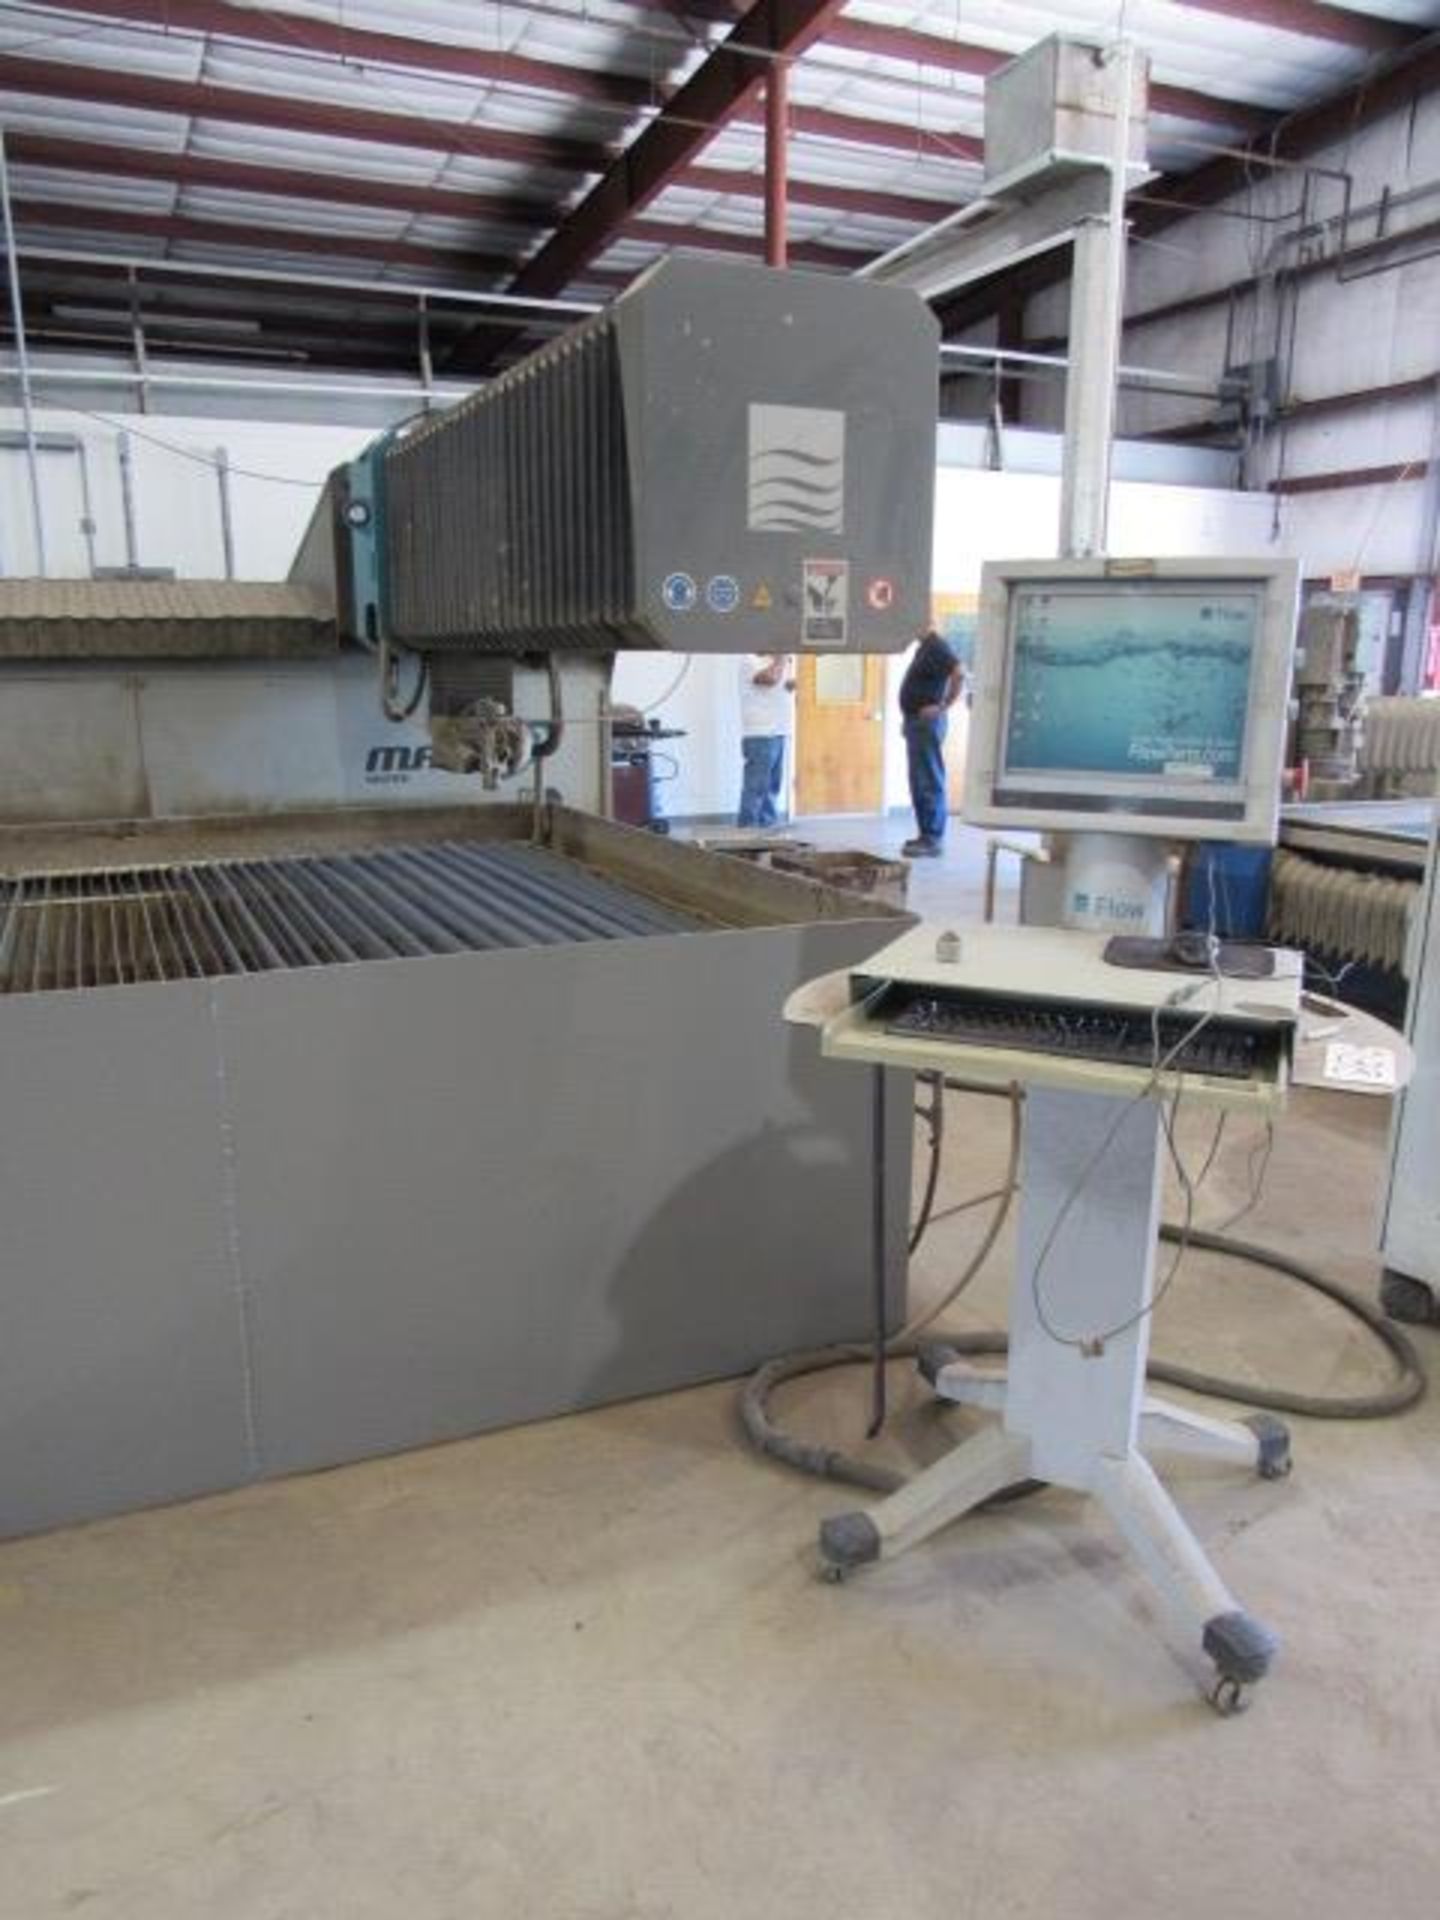 Flow Mach3 4020B 60,000 PSI 3-Axis CNC Water Jet - Image 6 of 10